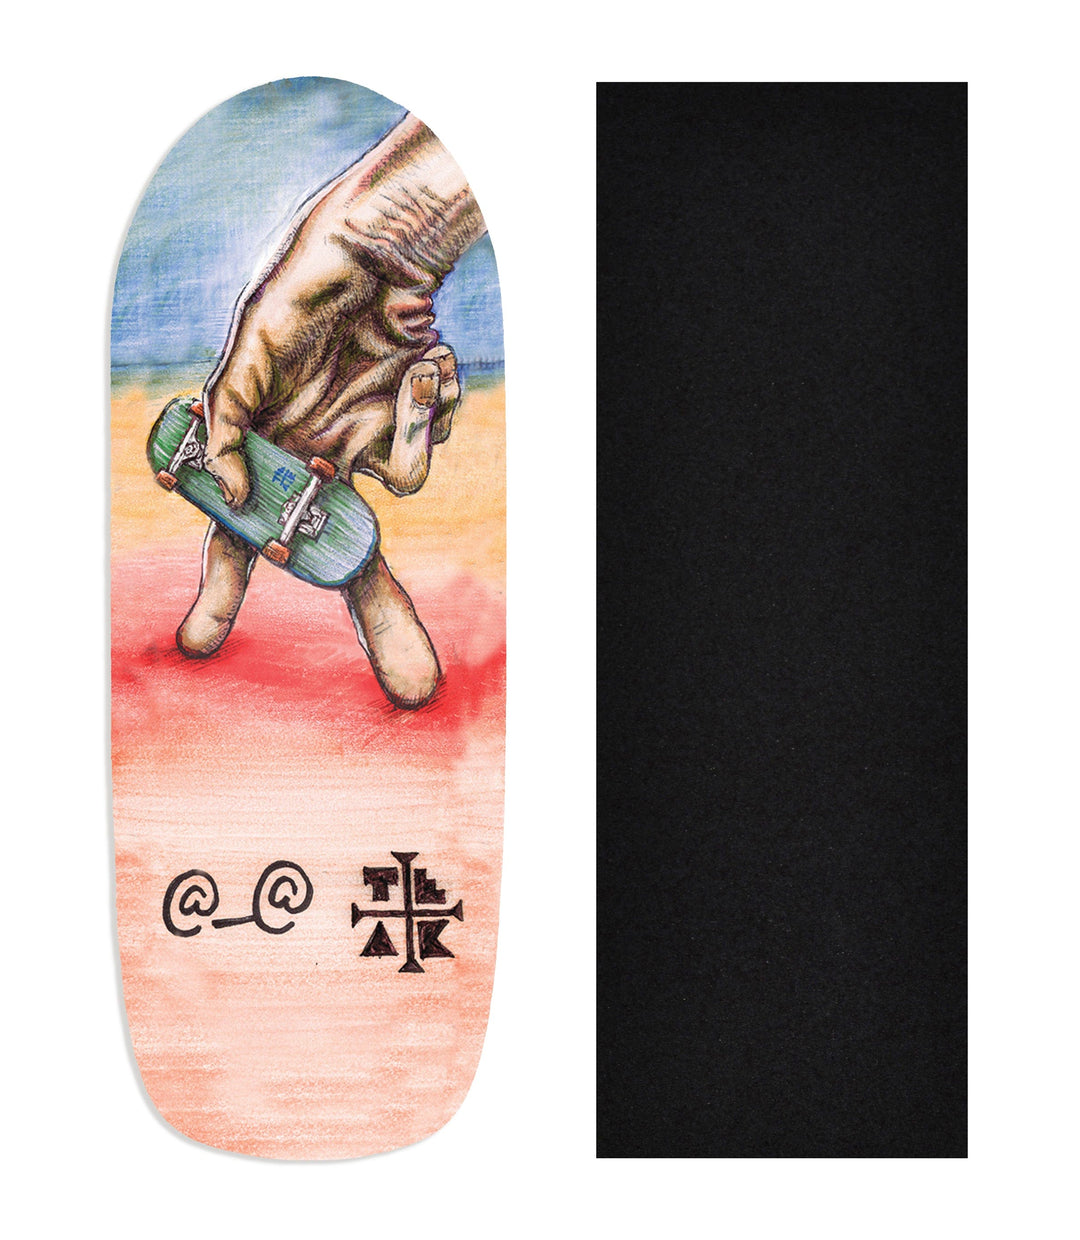 Teak Tuning Heat Transfer Graphic Wooden Fingerboard Deck, @louis_costa - Entry#24 Poolparty Deck